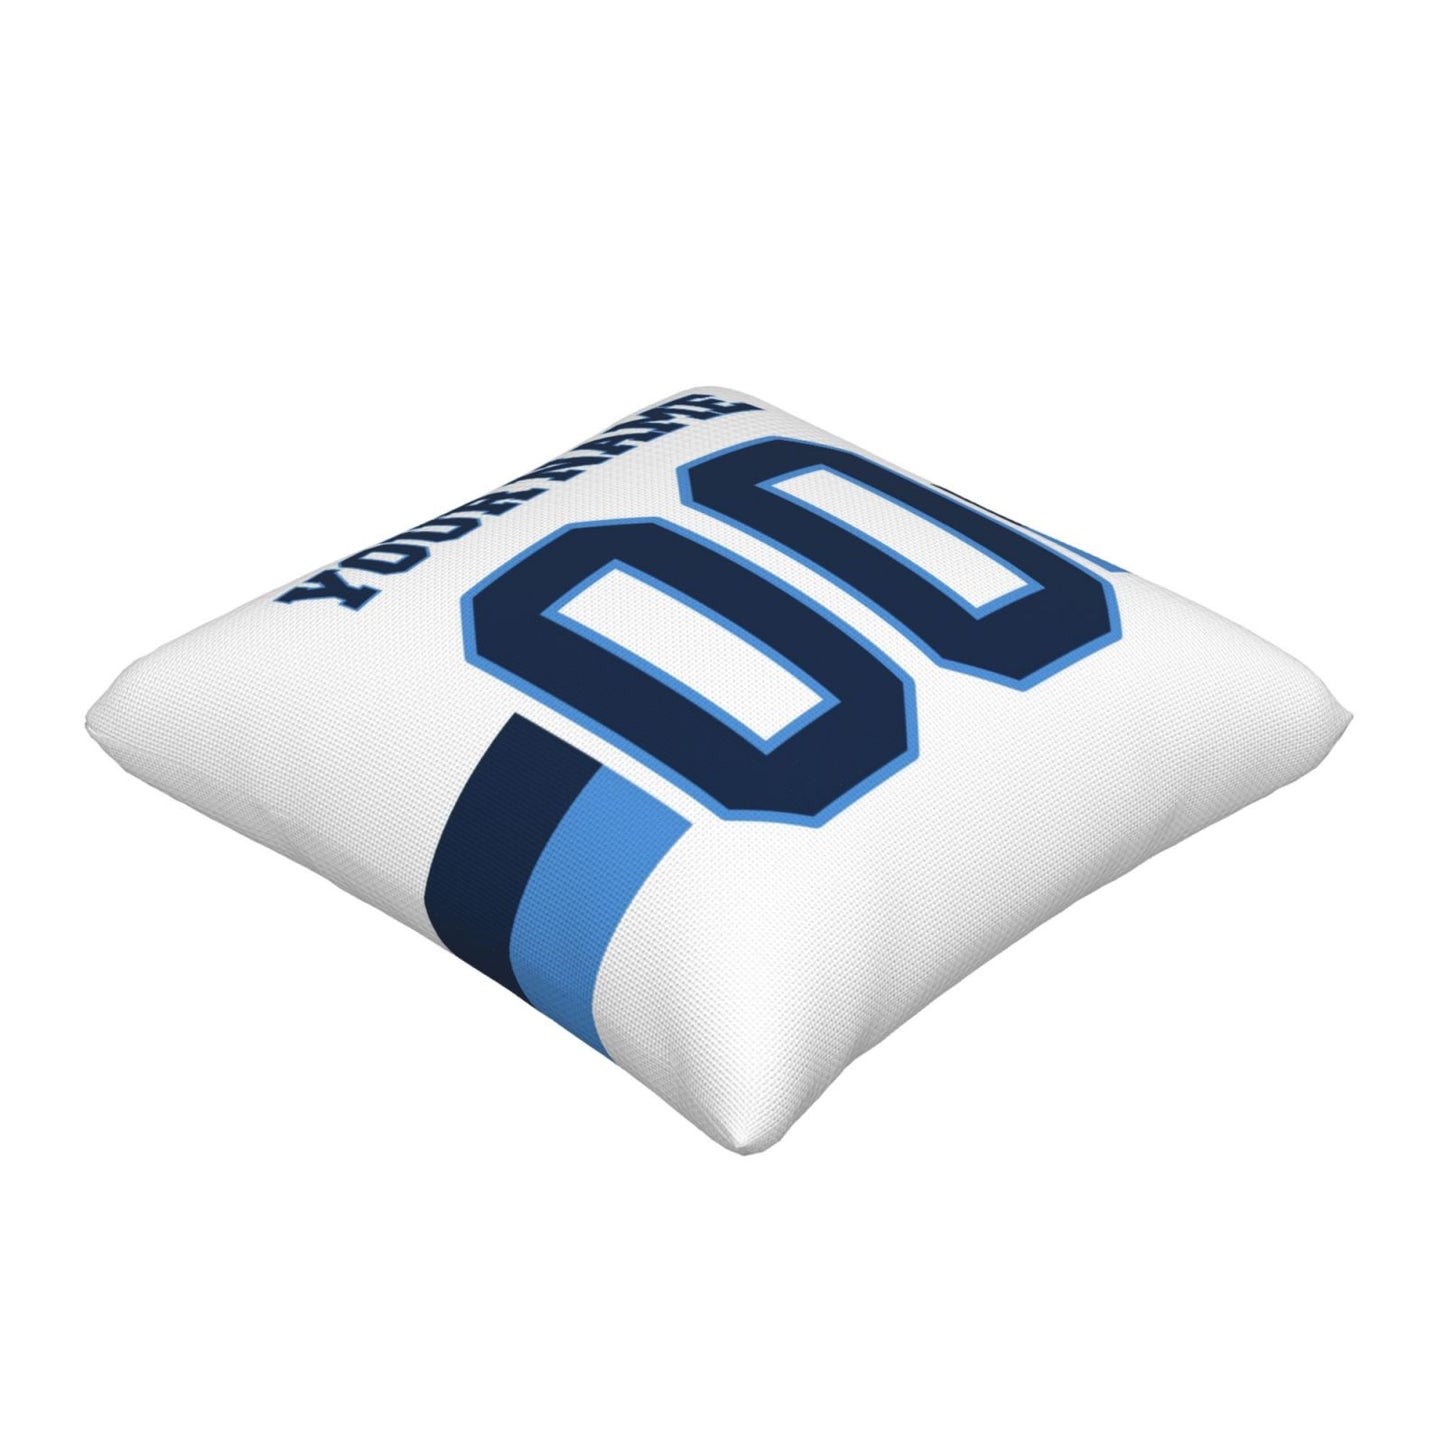 Custom White Tennessee Titans Decorative Throw Pillow Case - Print Personalized Football Team Fans Name & Number Birthday Gift